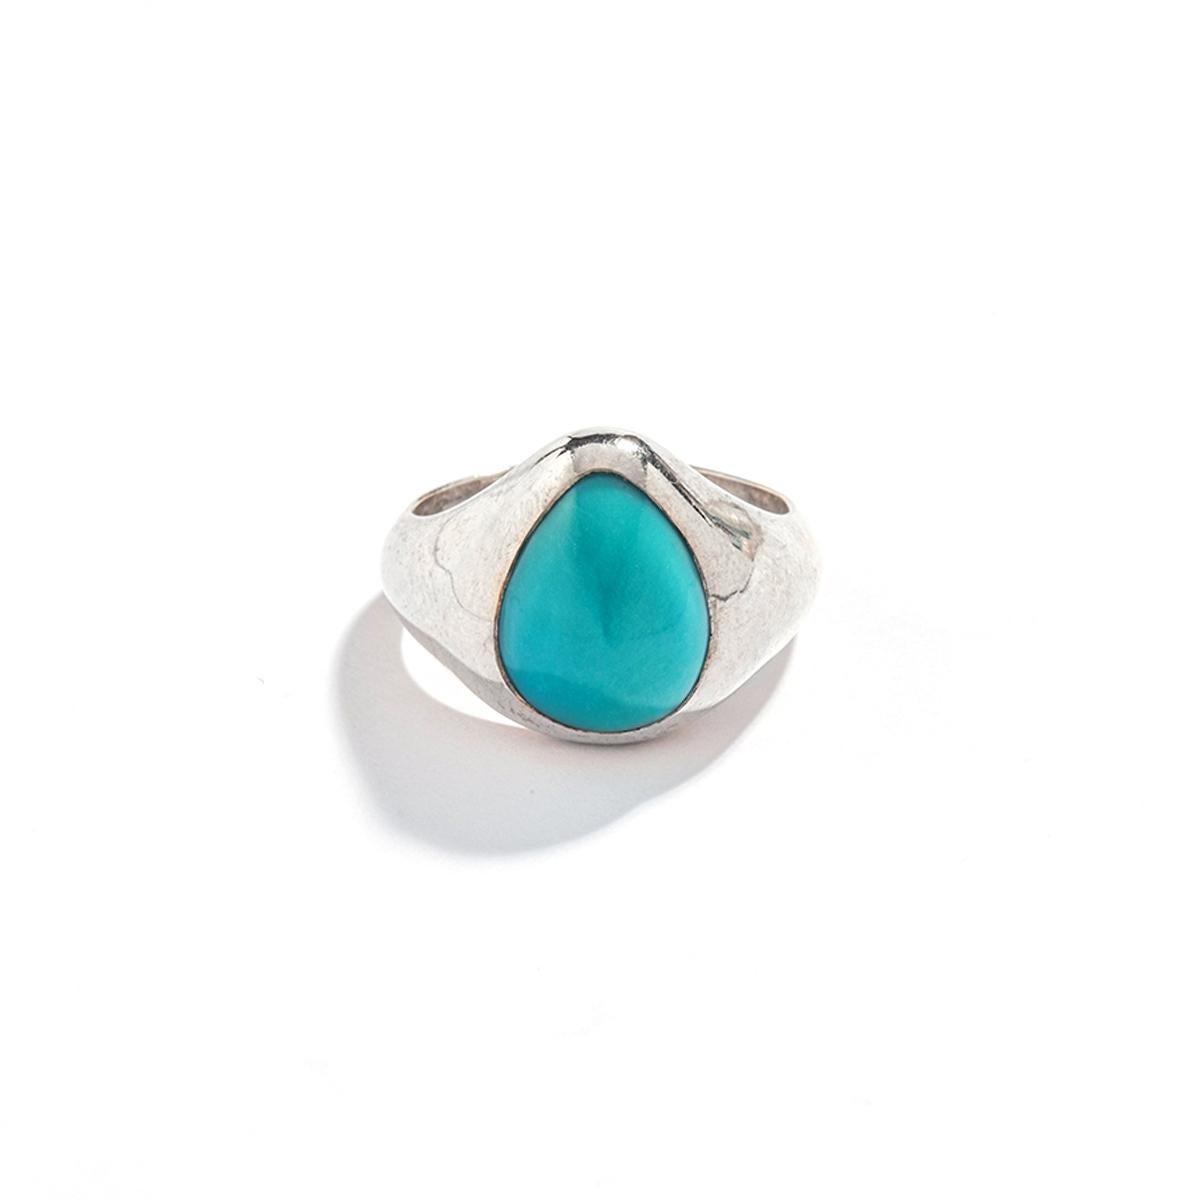 Significant Pear shape cabochon Natural antique Turquoise on Silver ring.

Ring size: 9.